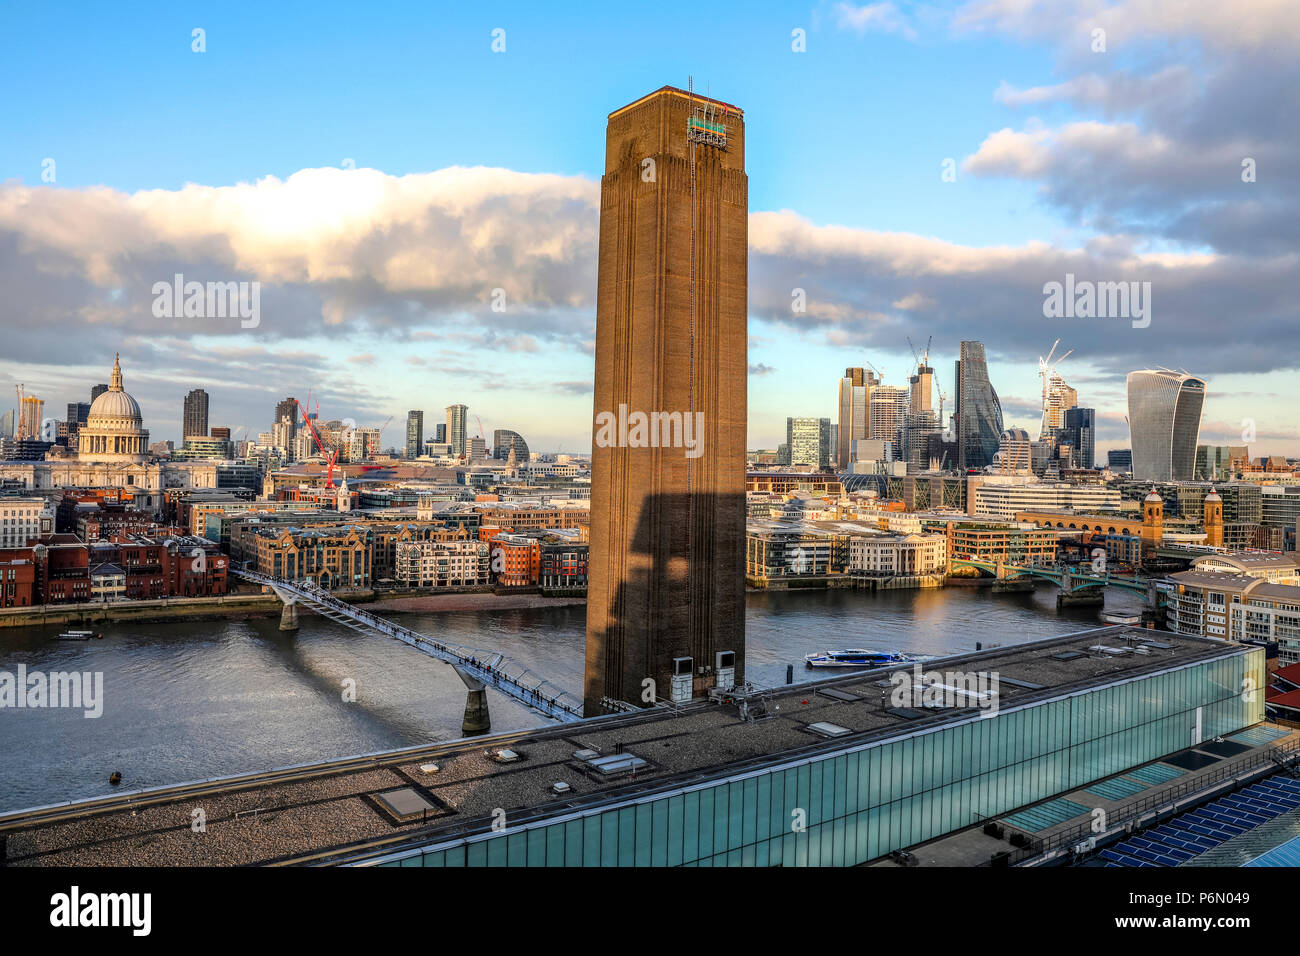 View of London from the Tate Modern. U.K. Stock Photo